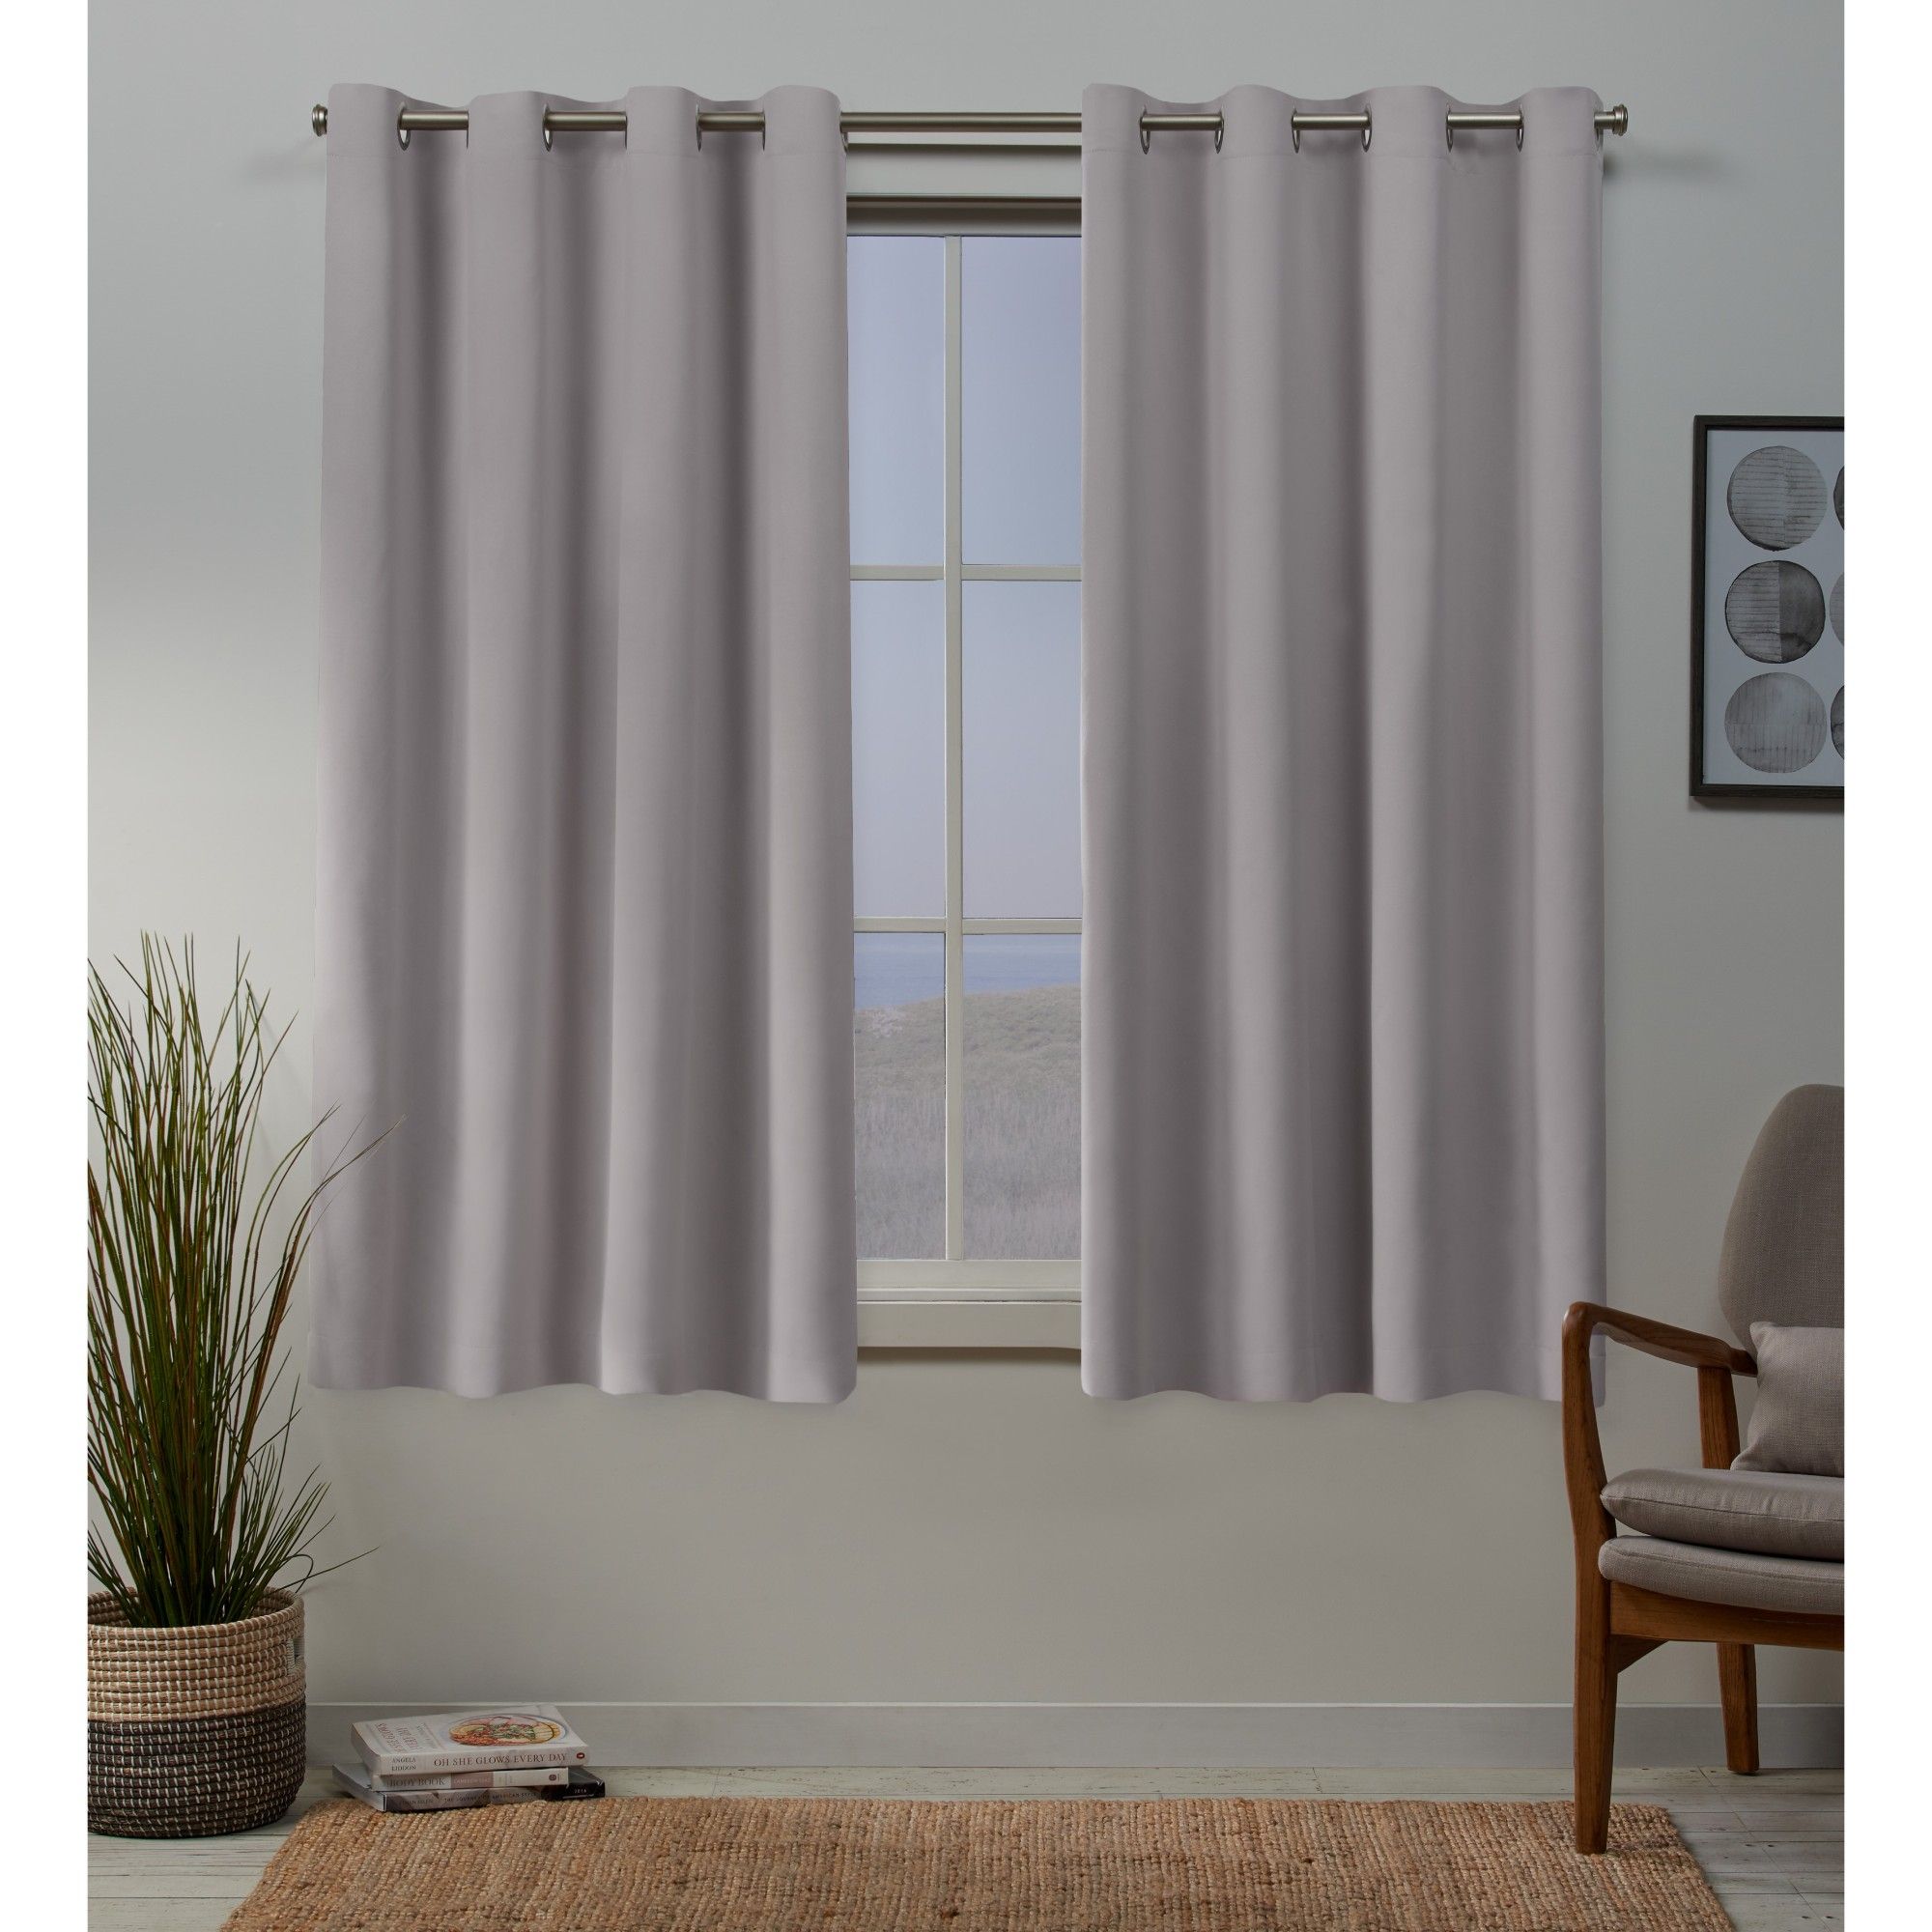 Sateen Woven Blackout Grommet Top Window Curtain Panel Pair Regarding Woven Blackout Grommet Top Curtain Panel Pairs (View 25 of 30)